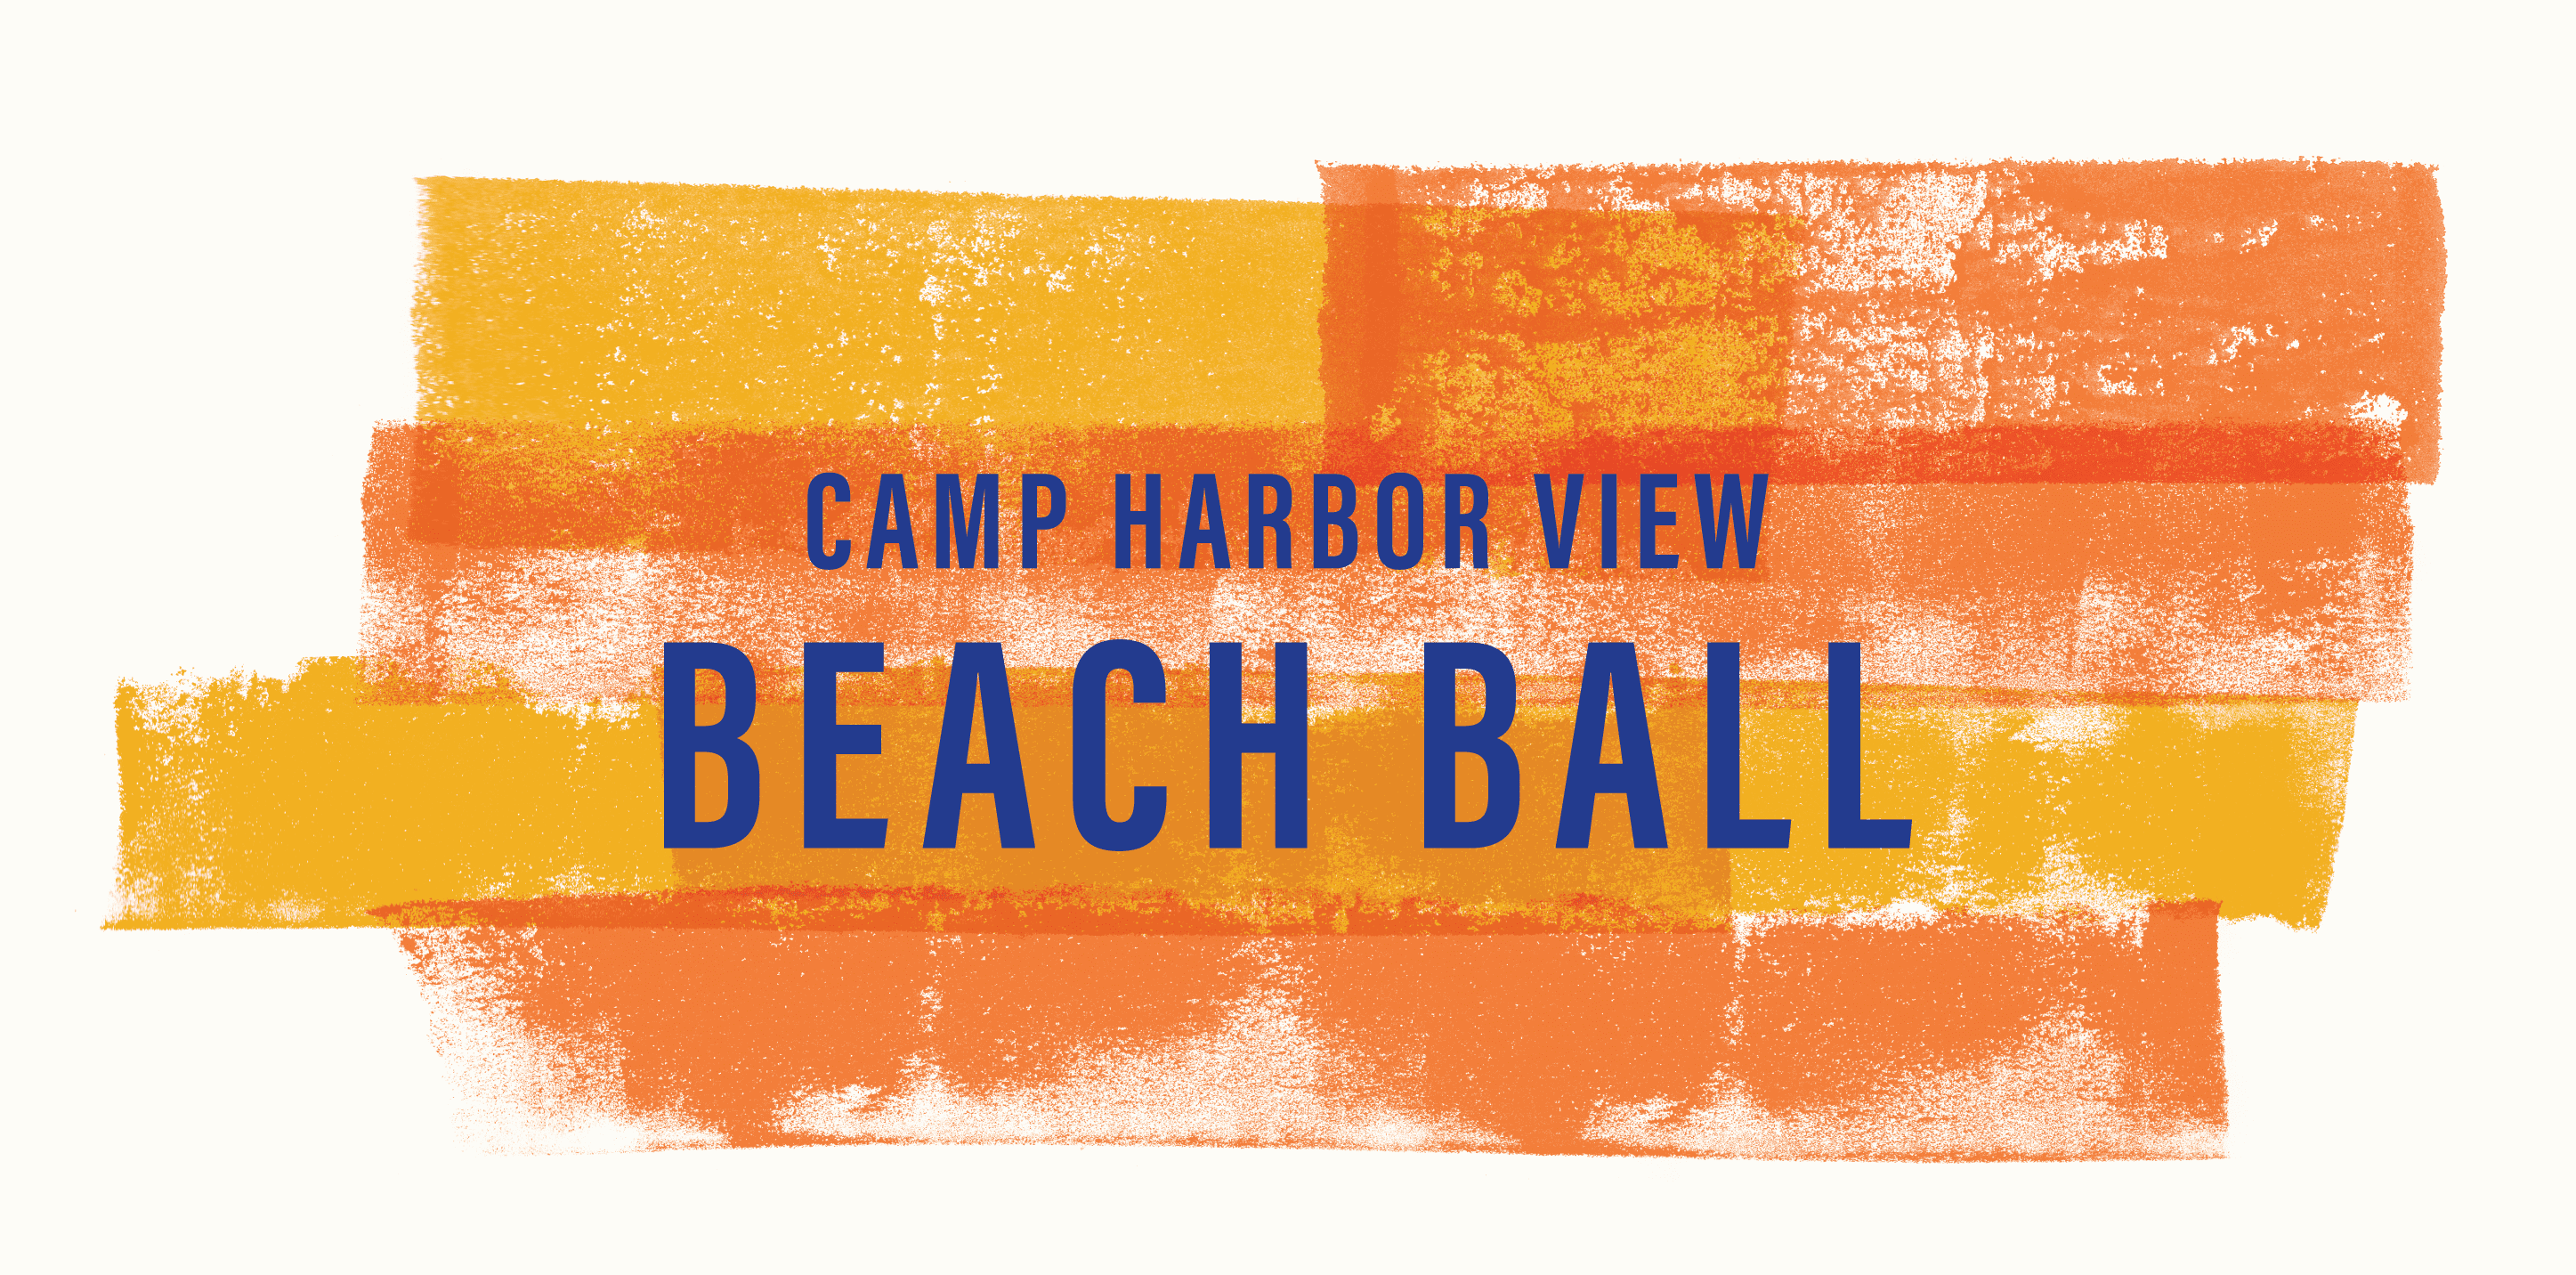 Camp Harbor View Beach Ball (navy blue text over orange and yellow paint strokes background)